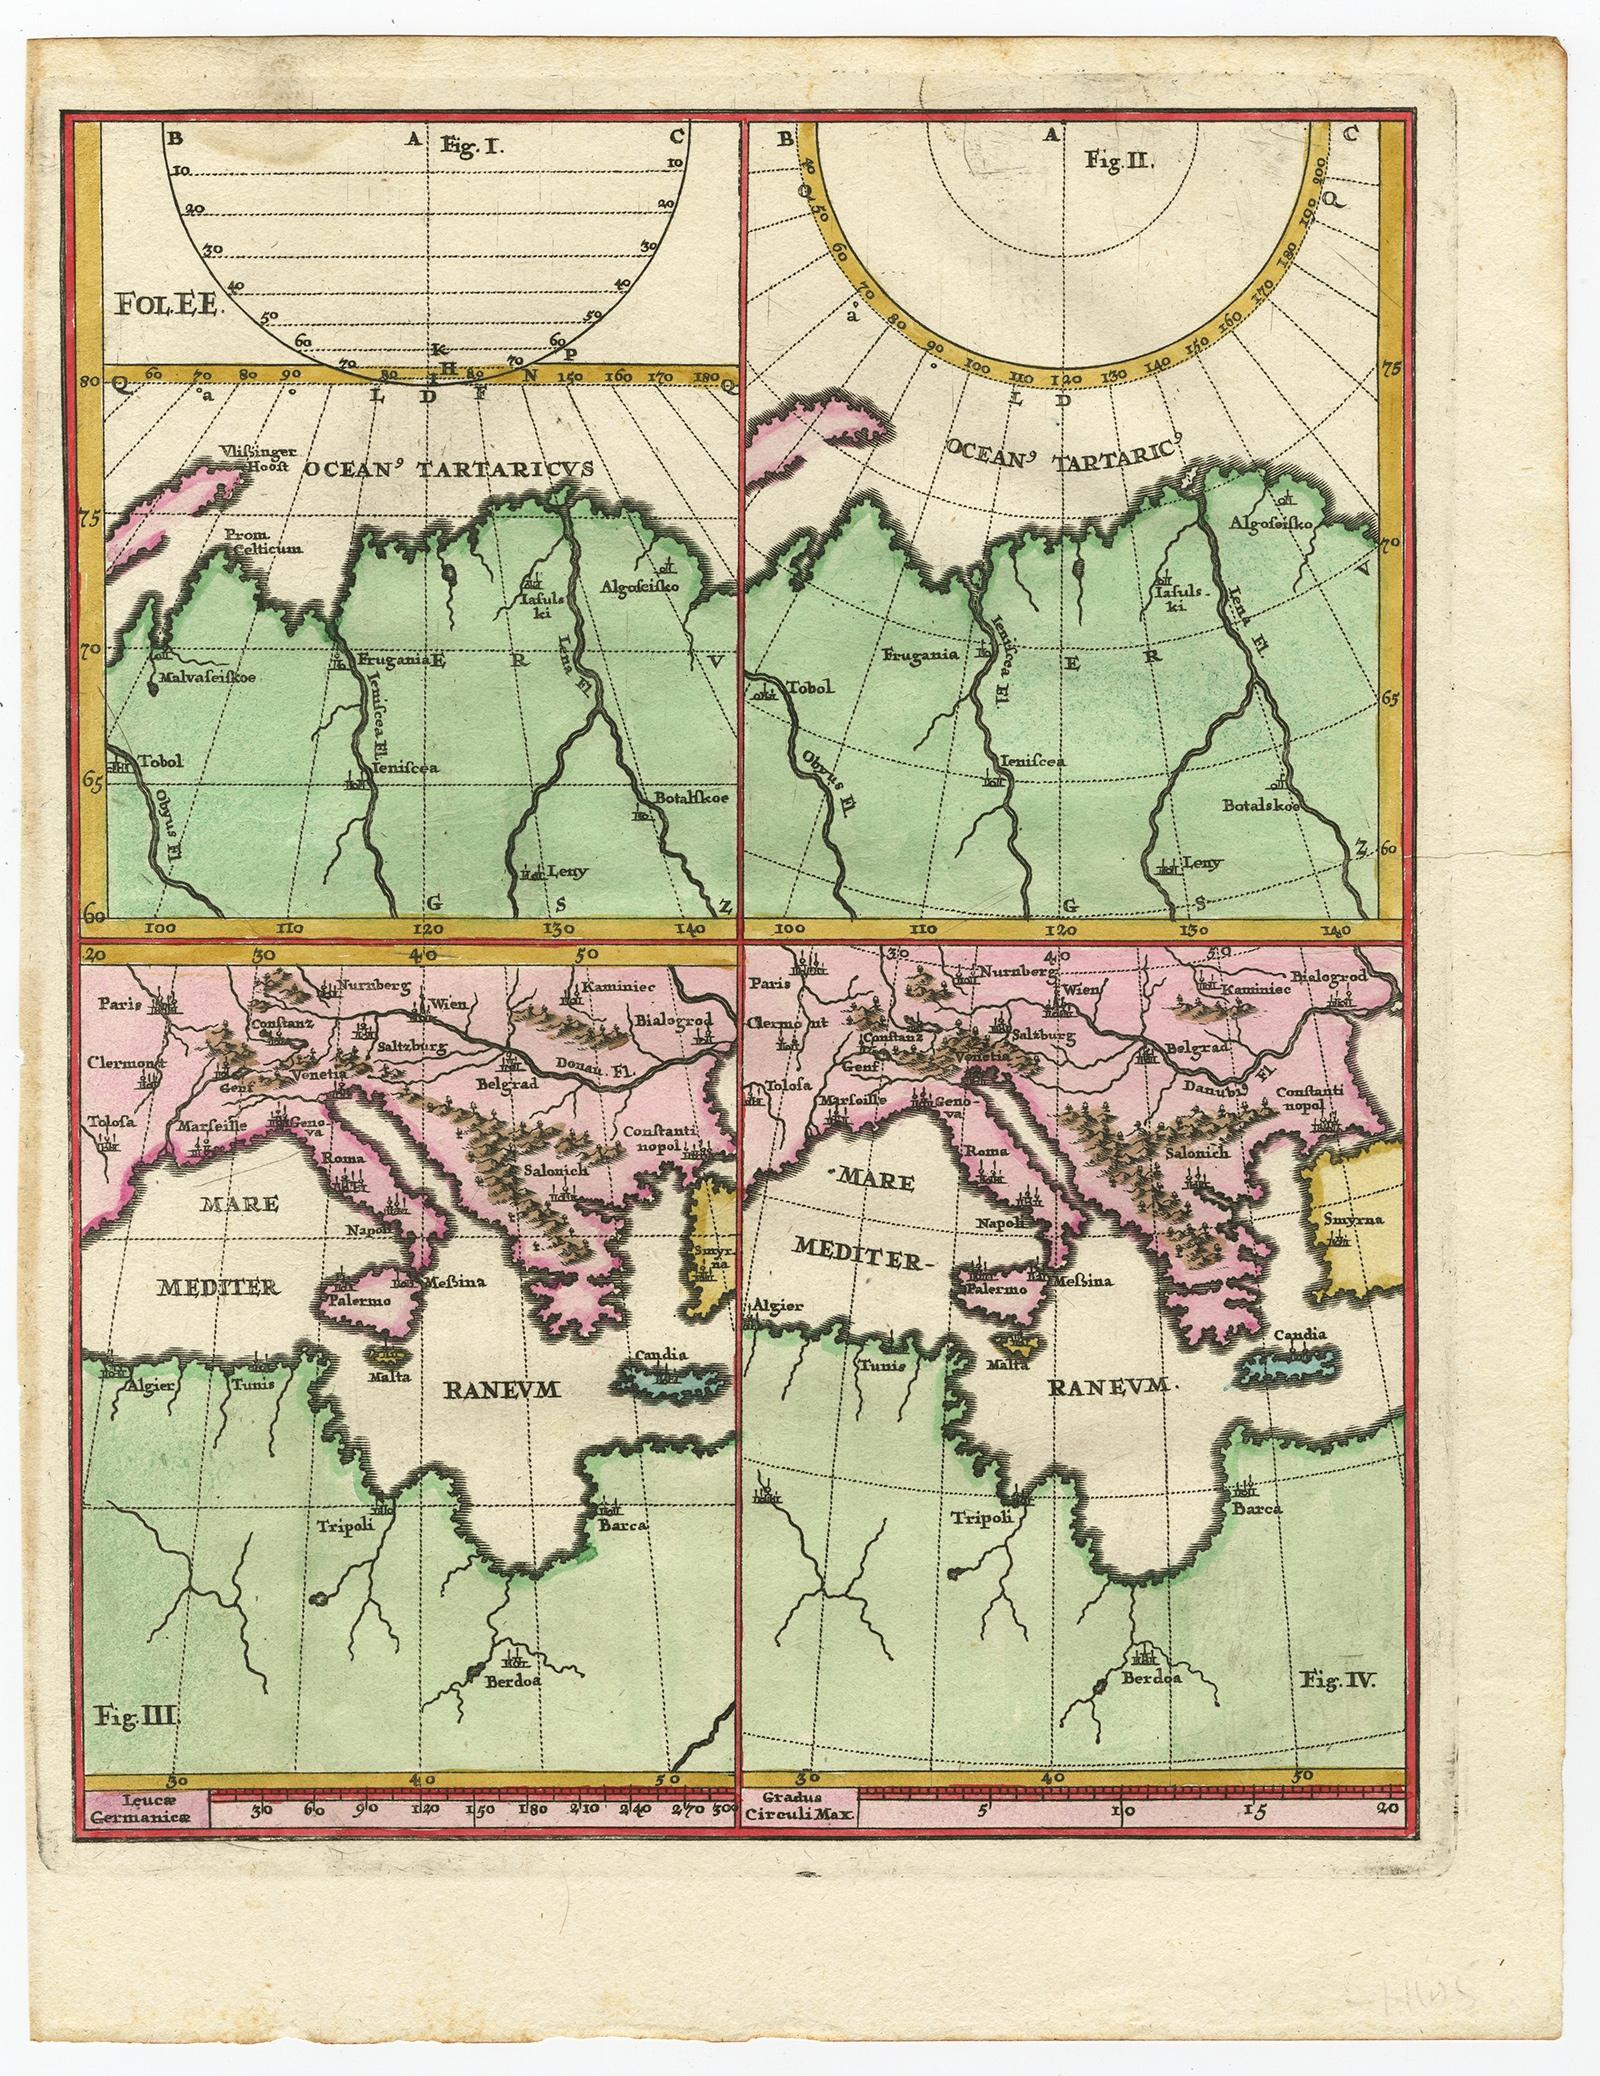 Antique map, untitled. 

Map of the Laptev Sea (Arctic Ocean) and the Mediterranean, printed for Scherer's 'Atlas Novus' (1702-1710). Scherer's 'Atlas Novus' forms an important milestone in the development of scientific and thematic cartography,